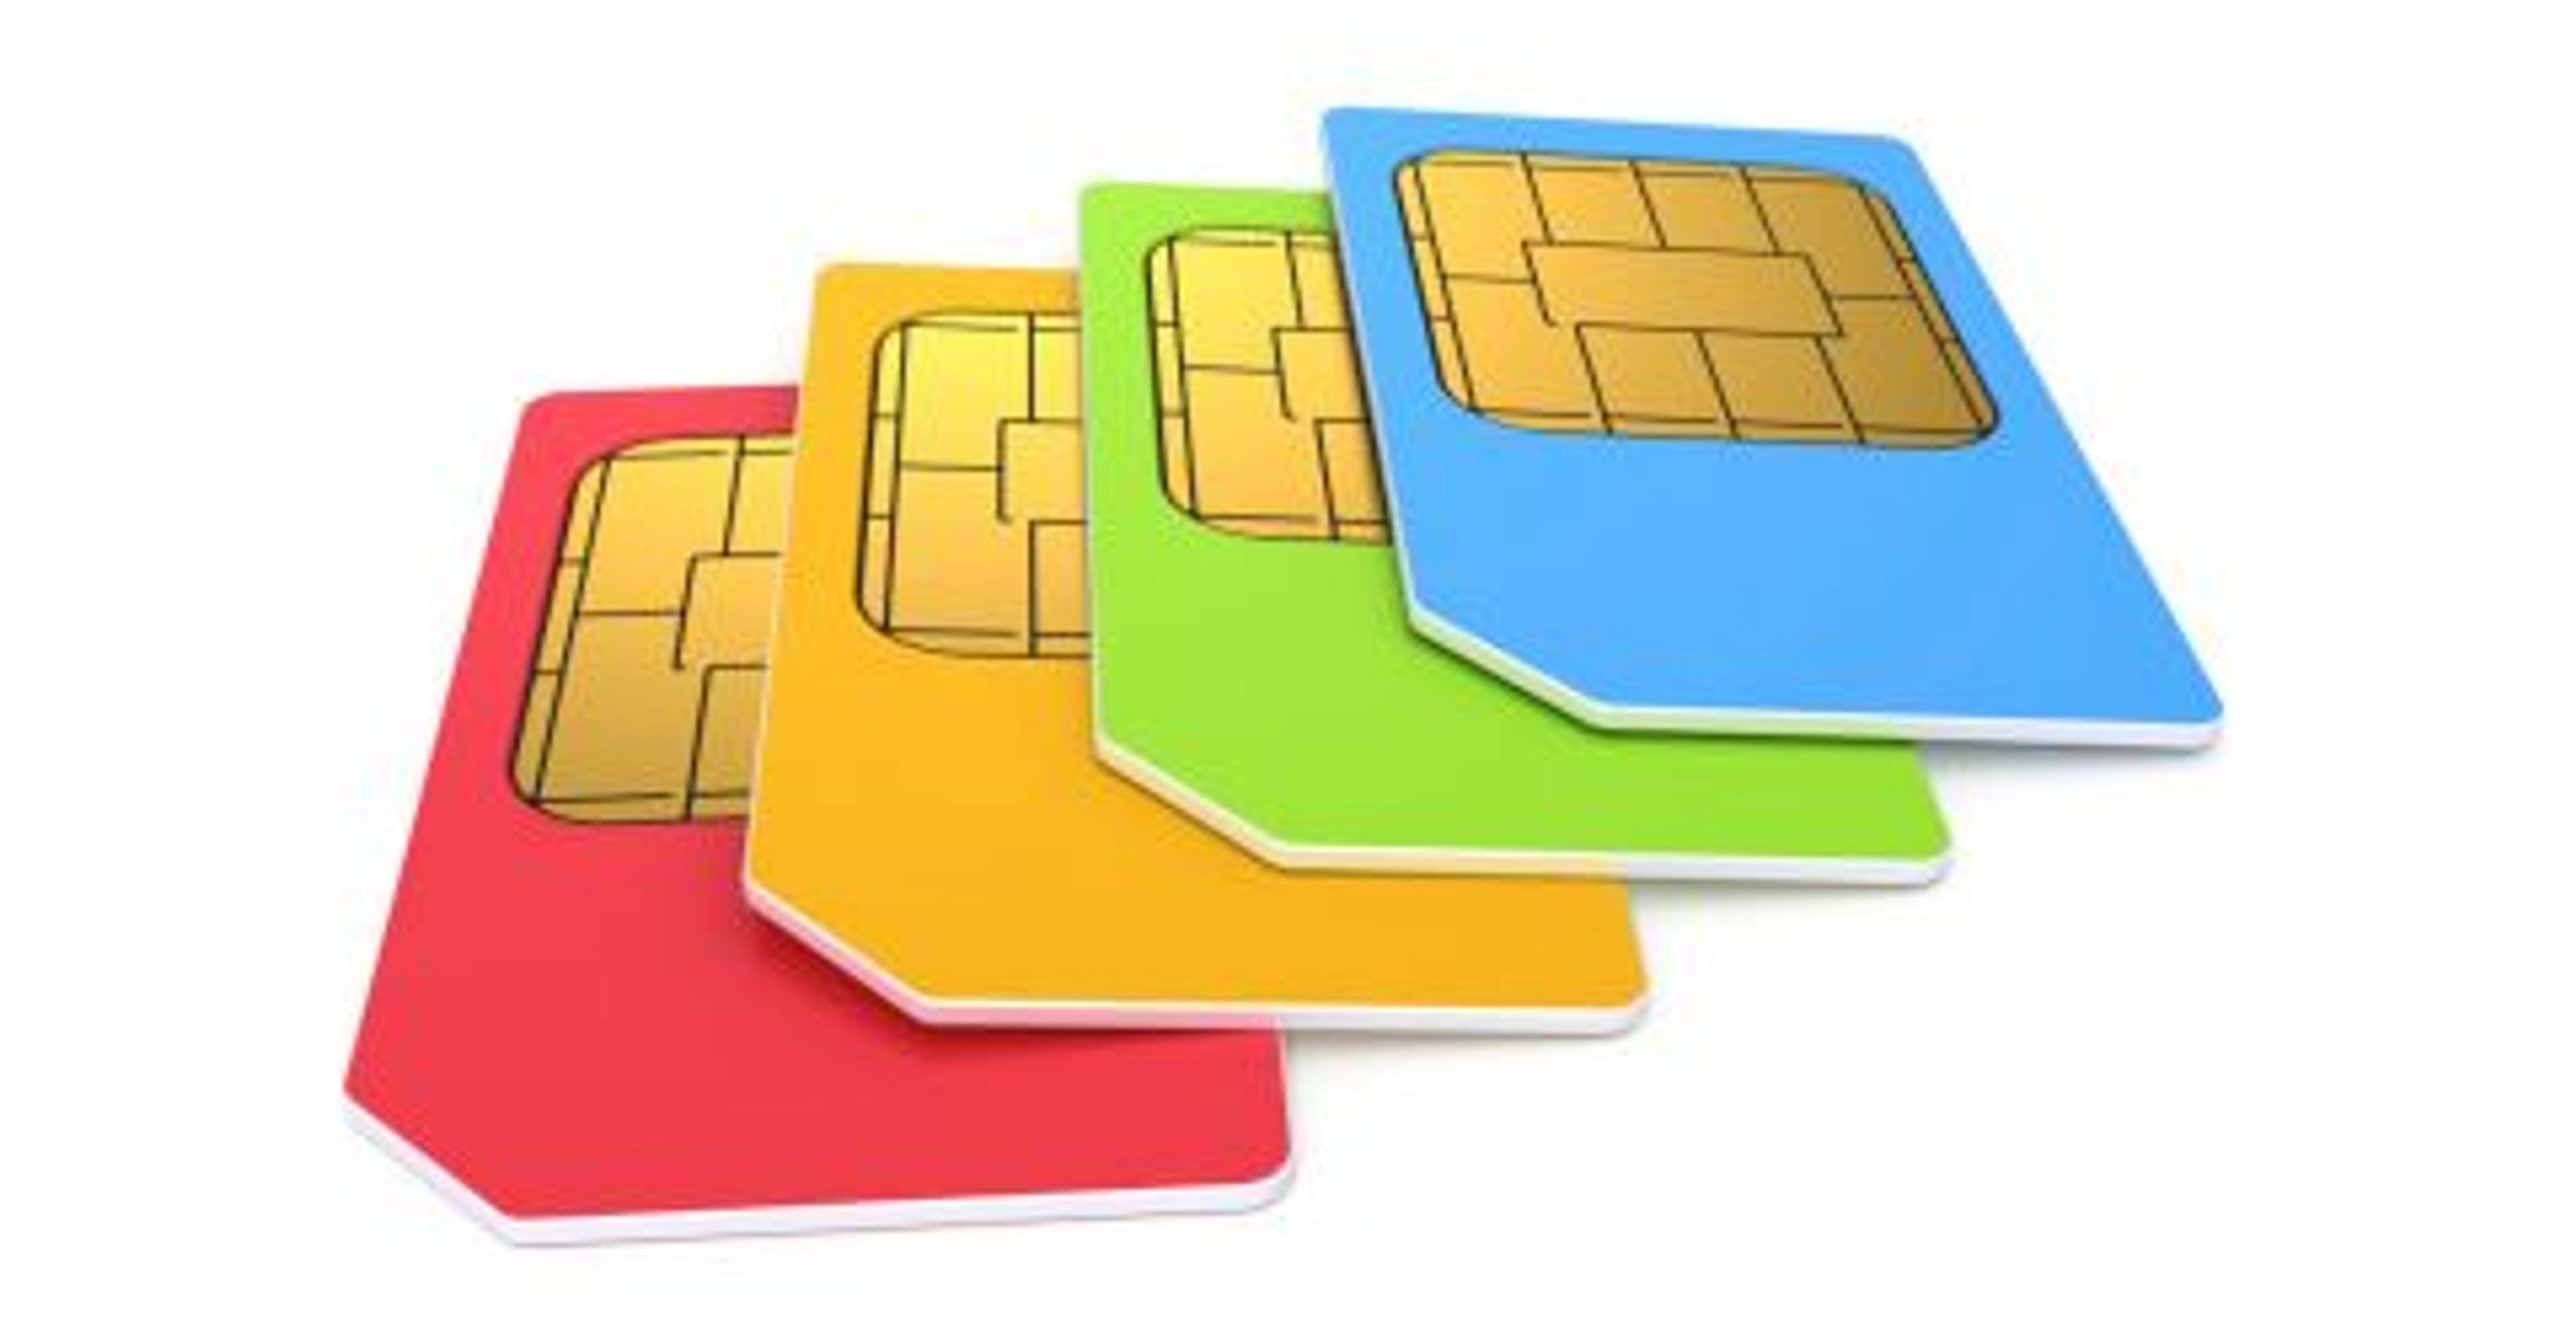 Duration Of SIM Card Activity: What You Need To Know